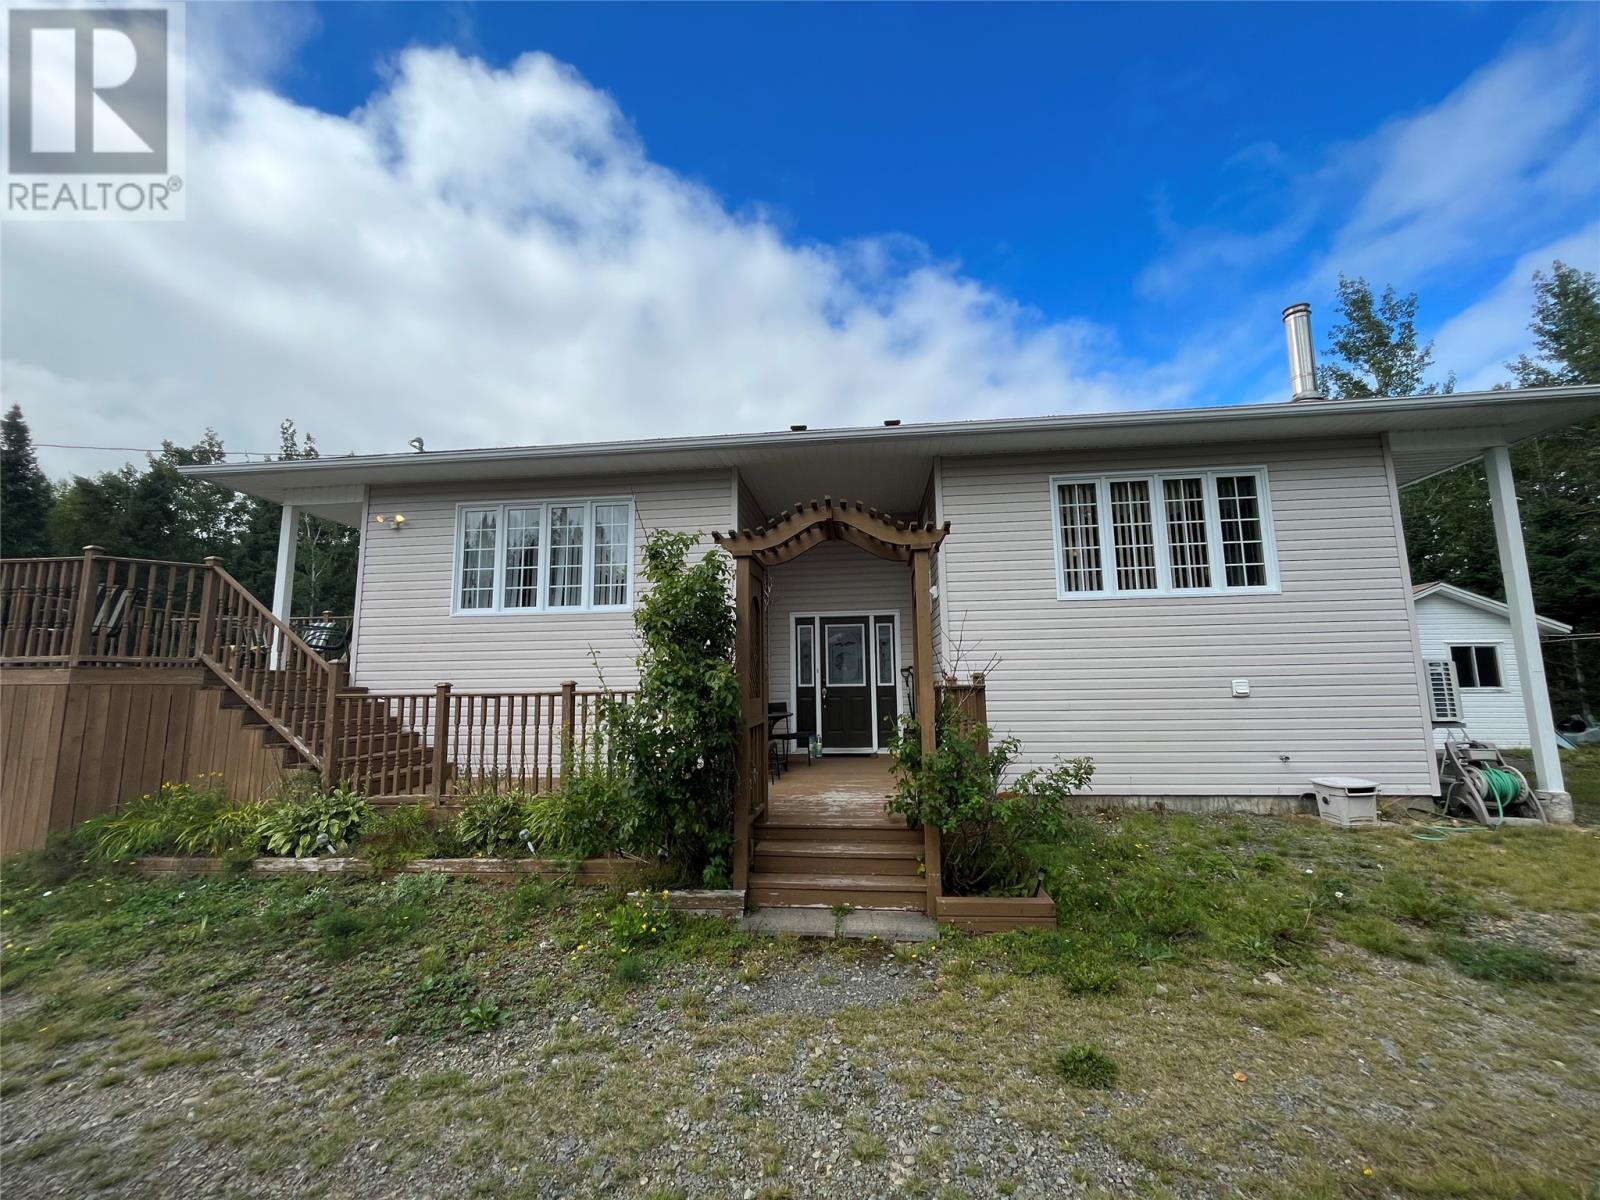 1 Rowsellville Road located in Roberts Arm, Newfoundland and Labrador